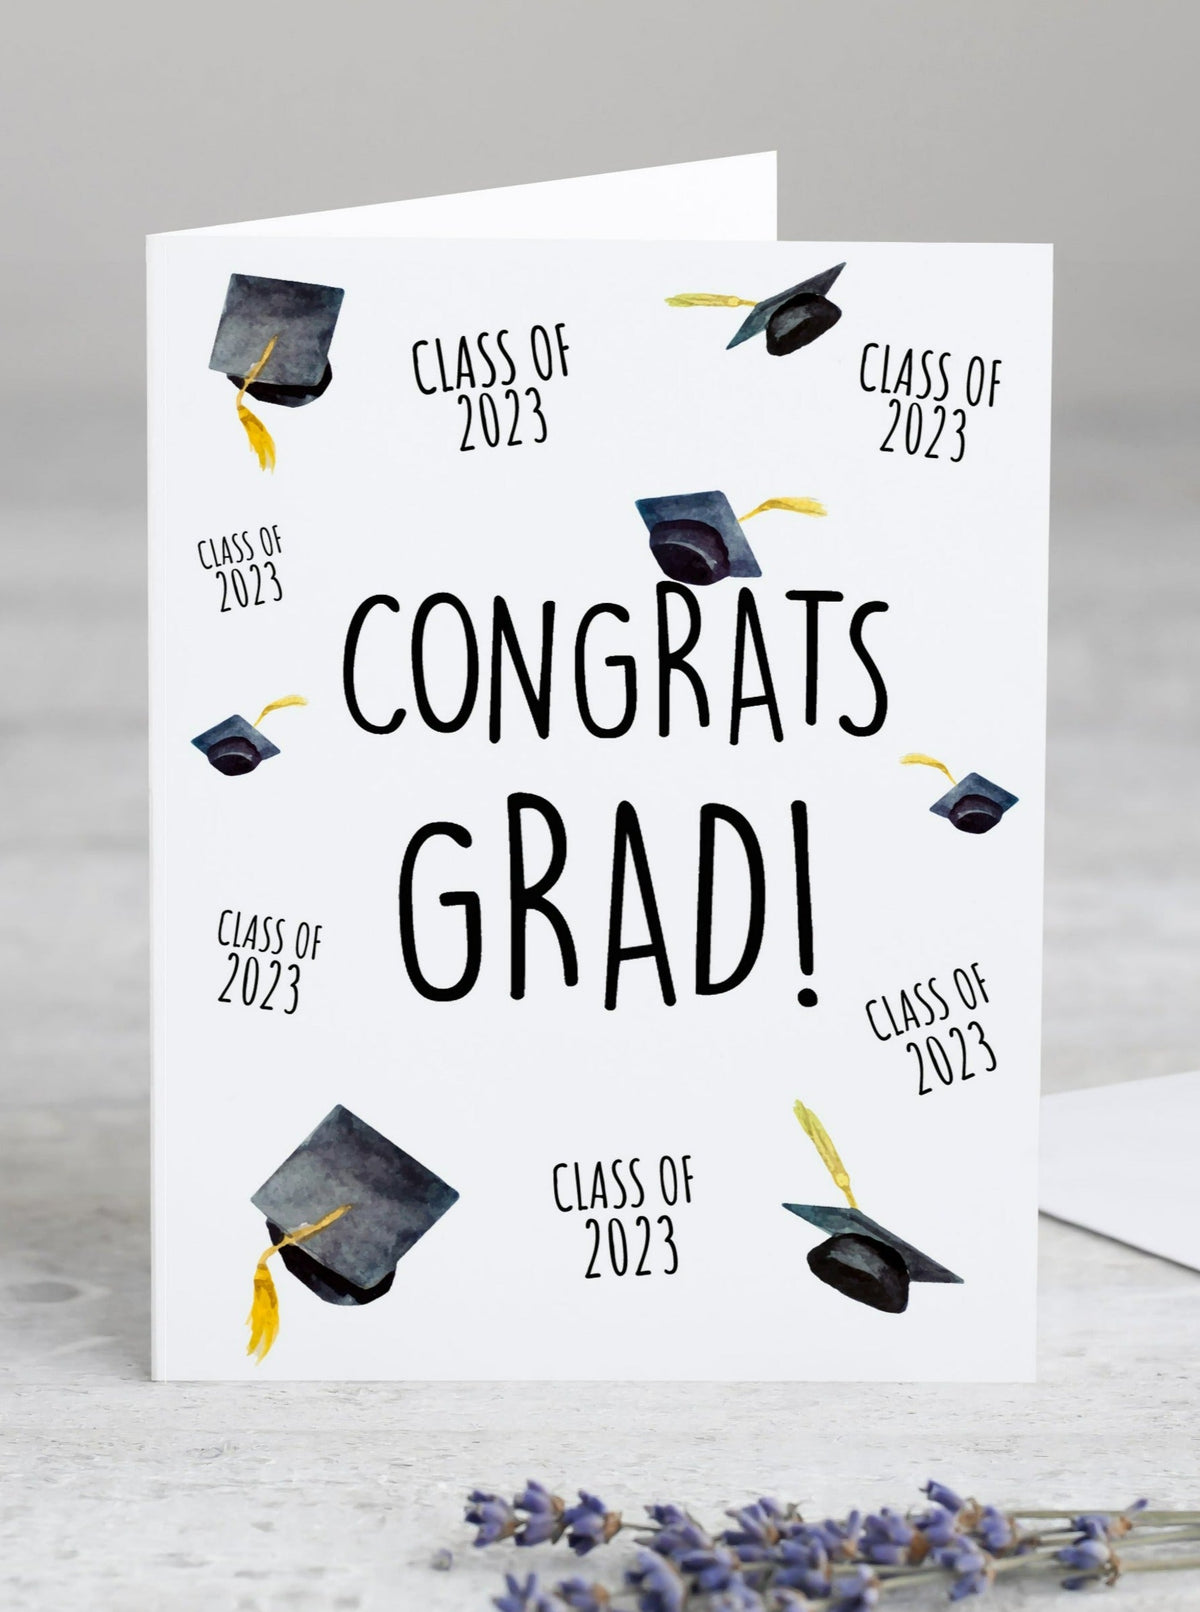 class of 2023 congrats grad graduation card.  Graduation hats and class of 2023 arranged all over the face of the card.  Black caps and gold tassels.